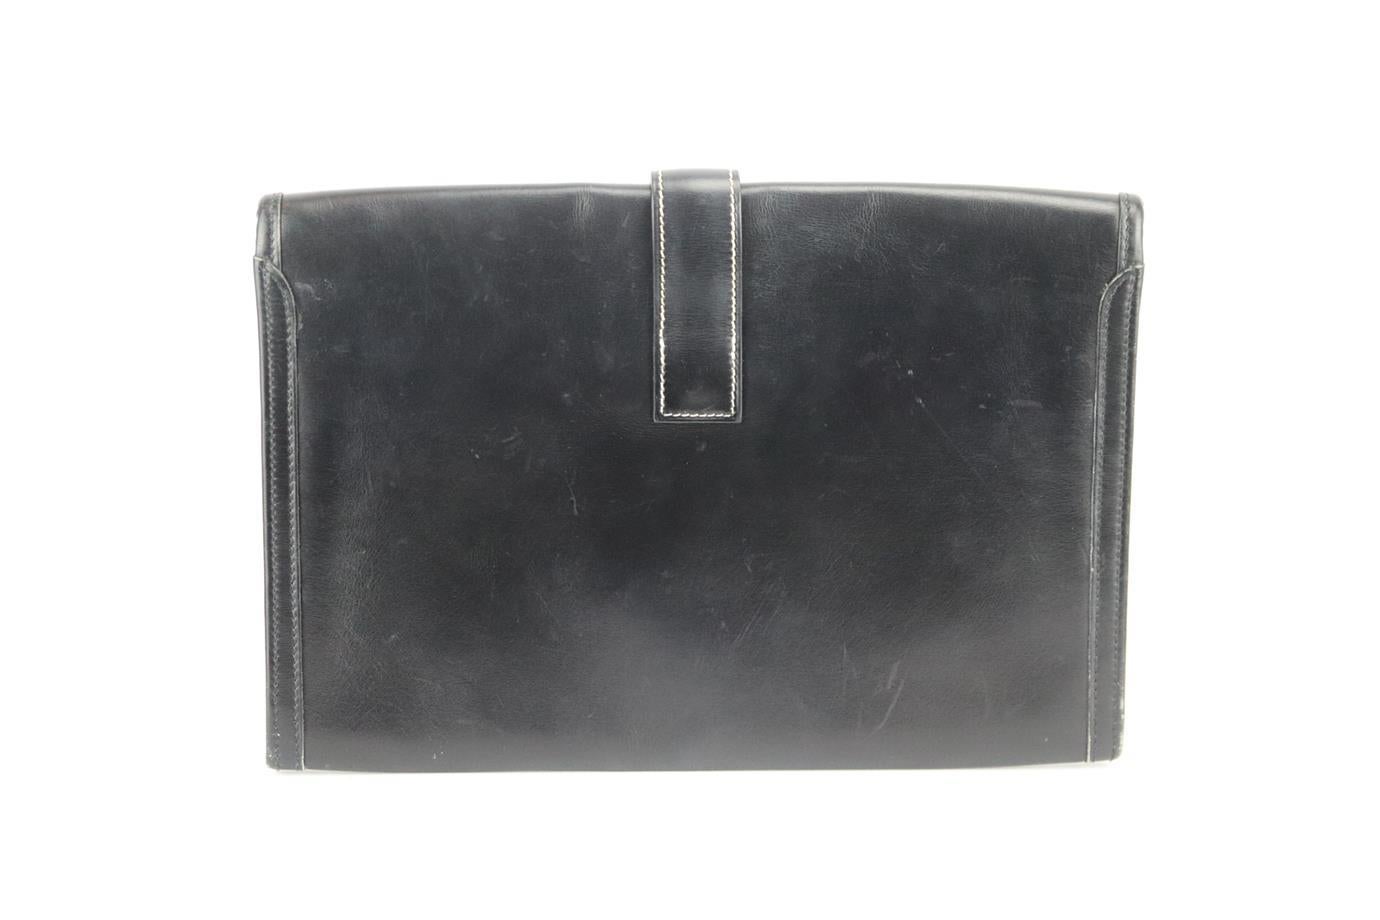 Hermès 1994 Jige 29cm box leather clutch. Made from black ‘Box’ leather with white contrast stitching tracing the edges, it has a large internal compartment with H flap at the front. Black. Slide lock fastening at front. Does not come with dustbag